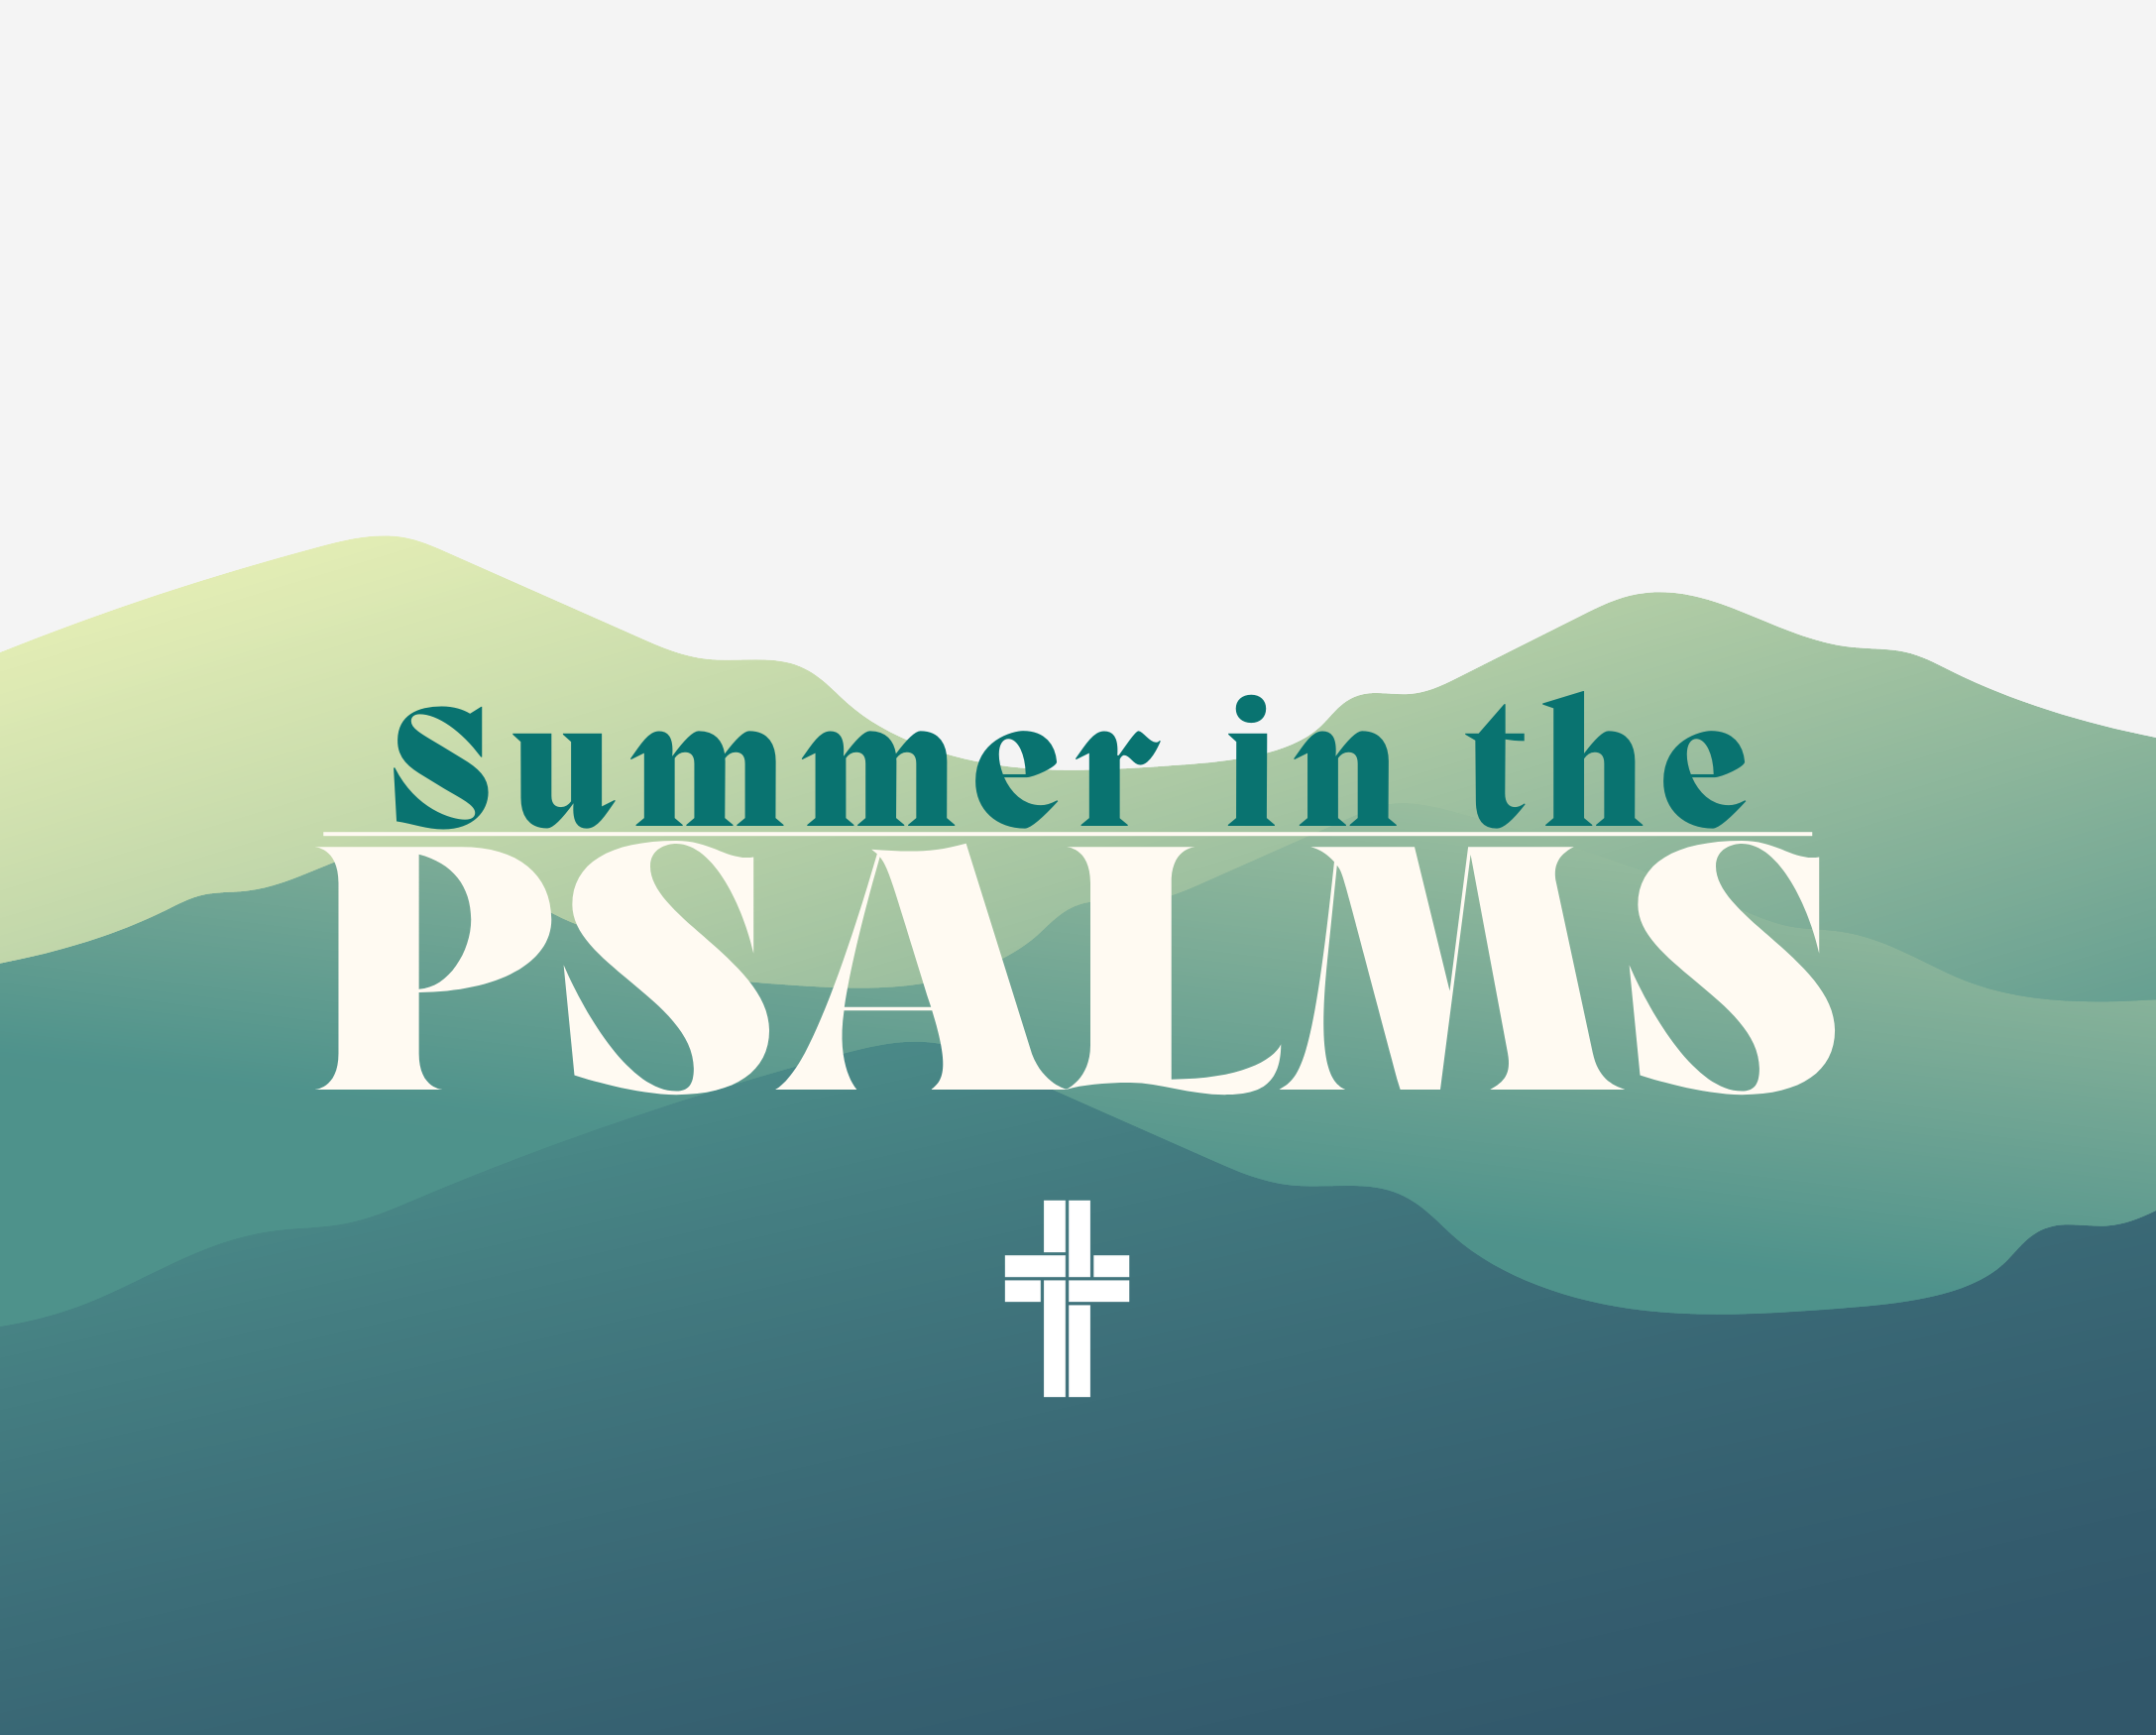 Summer in the Psalms: Our Shepherd